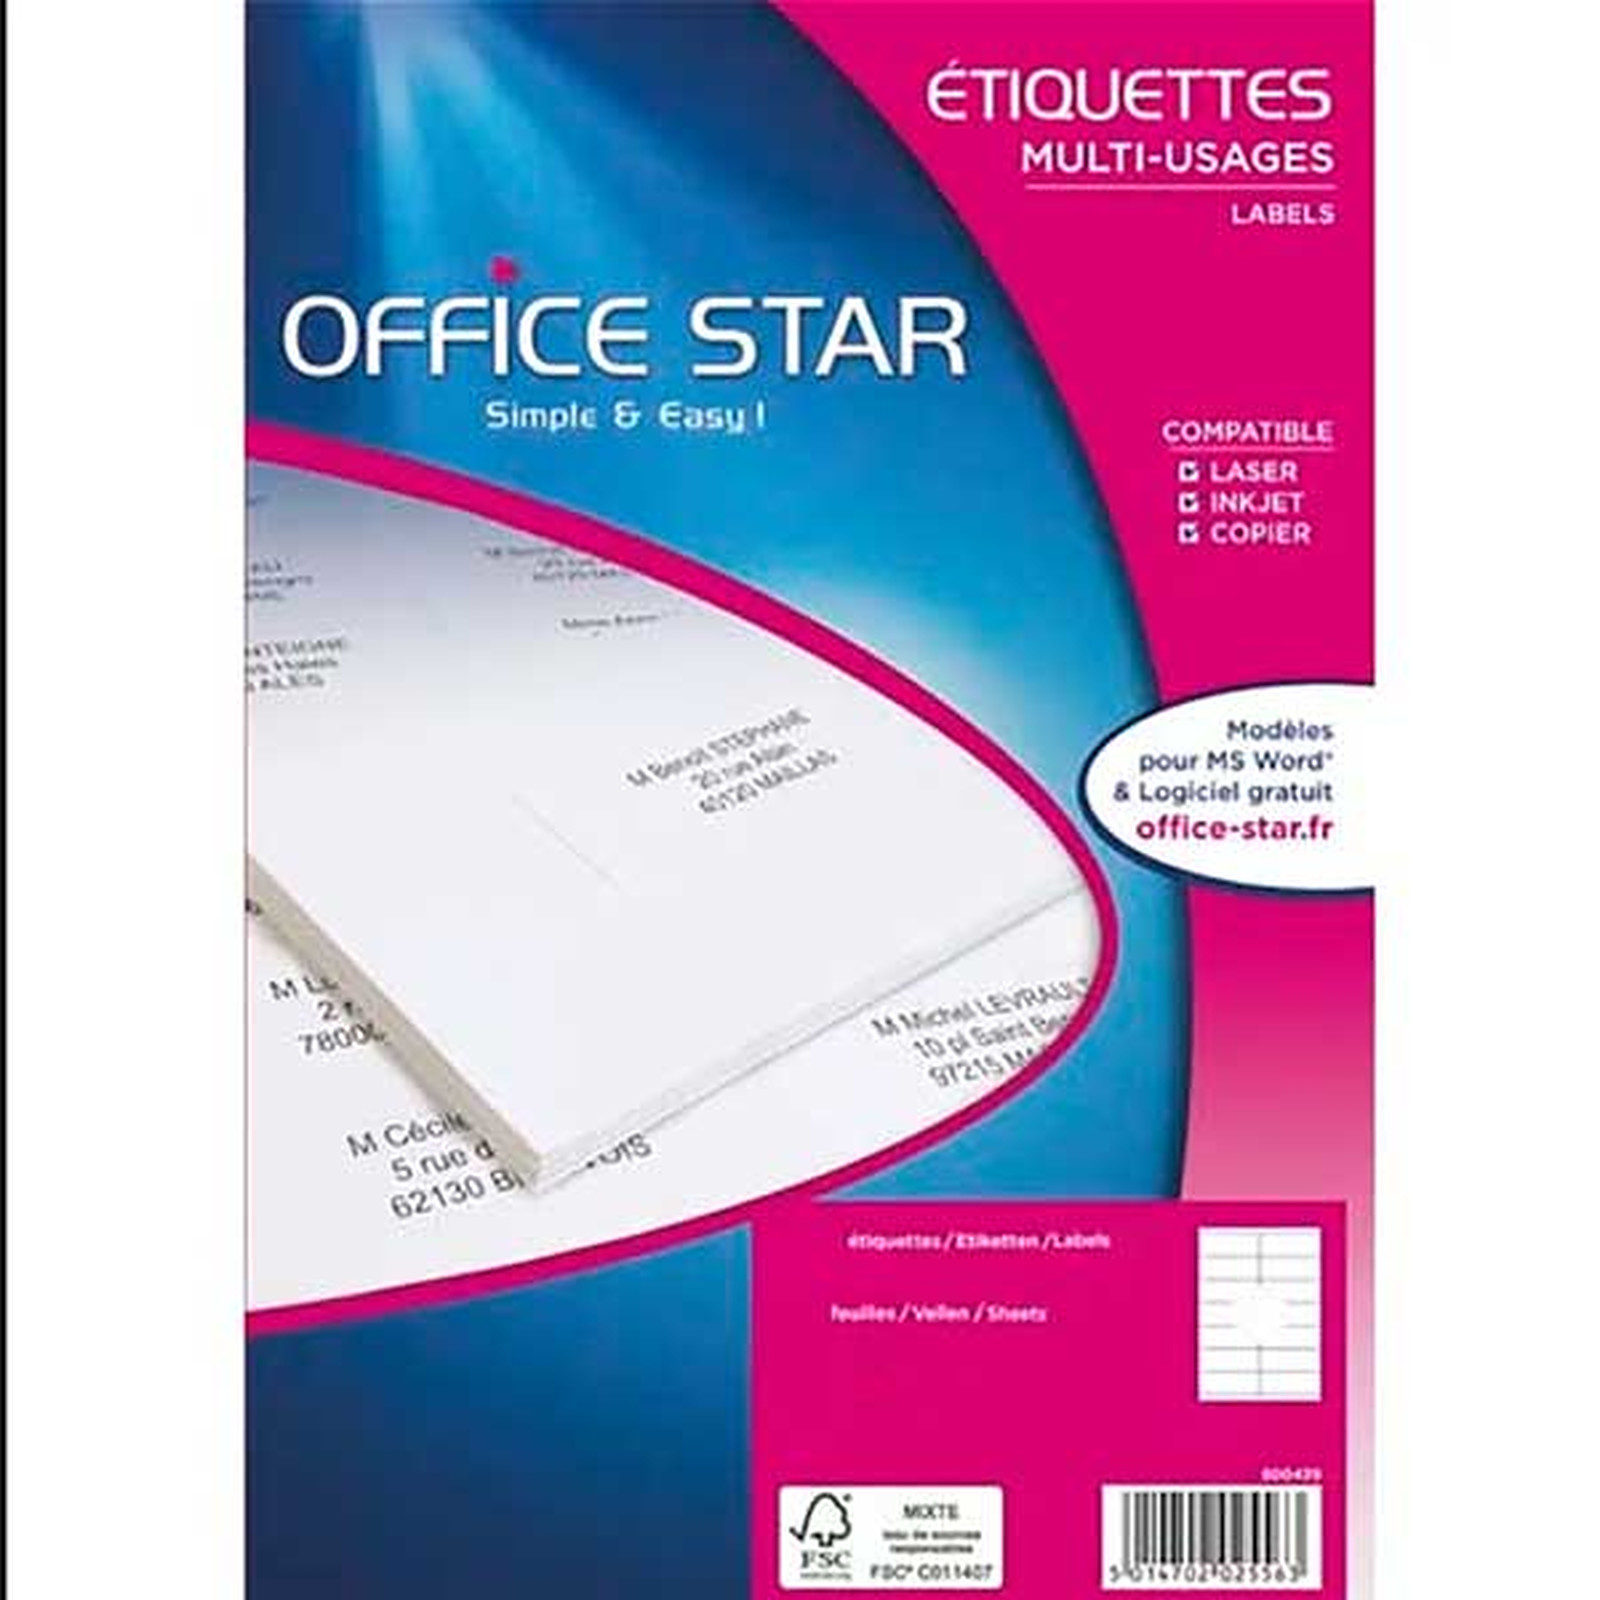 Office Star Etiquettes multi-usage blanches 70 x 37 mm x 2400 - Etiquette Office Star